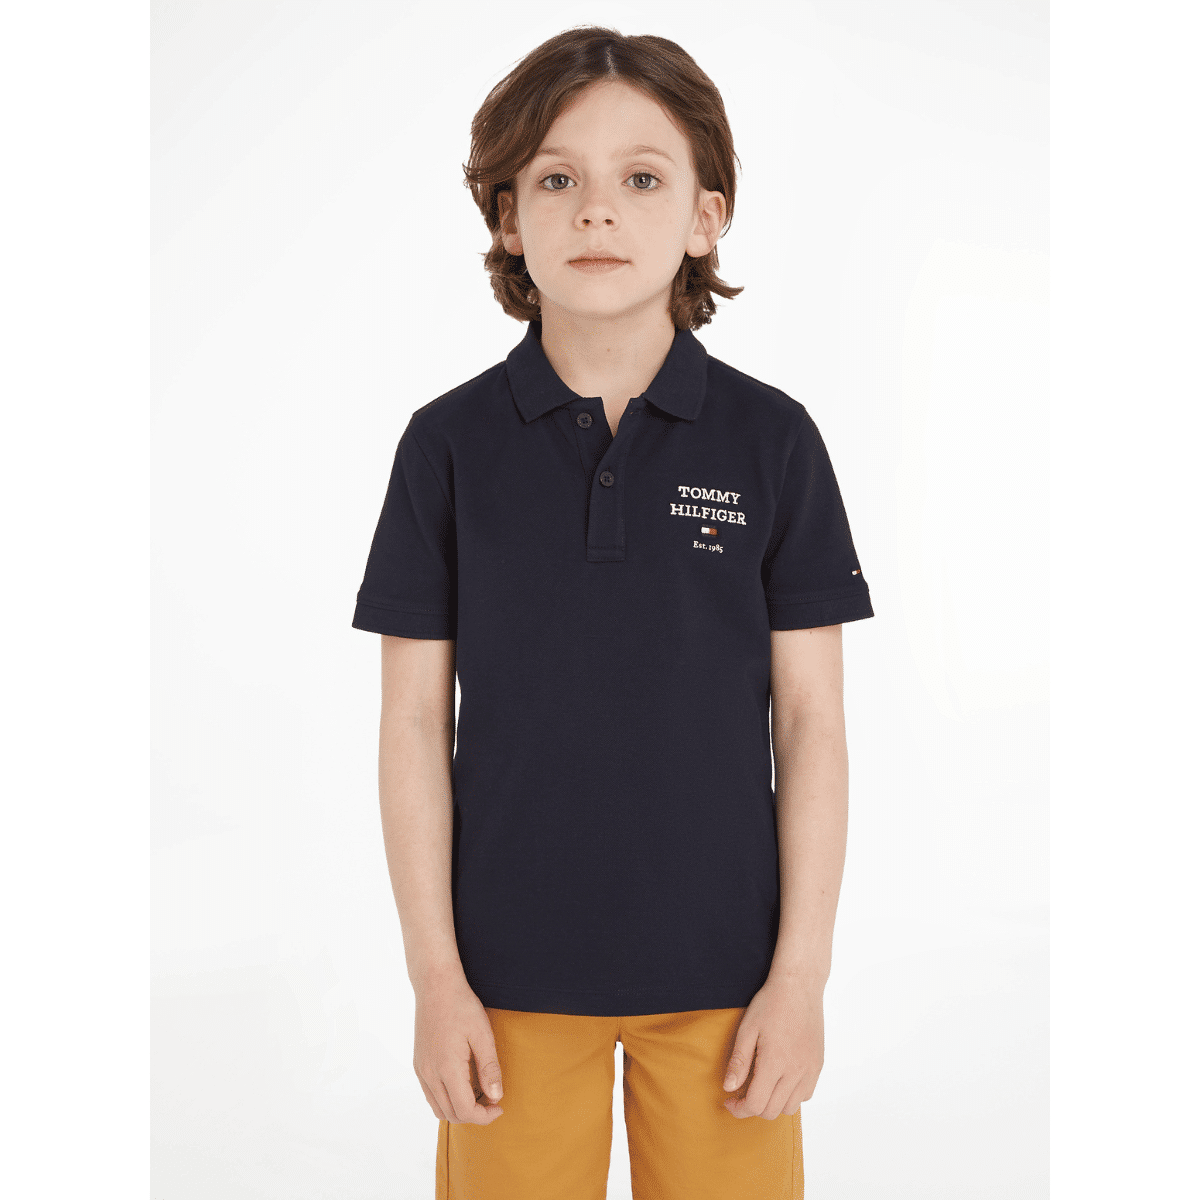 Tommy hilfiger boys black polo shirt logo on model with yellow trousers